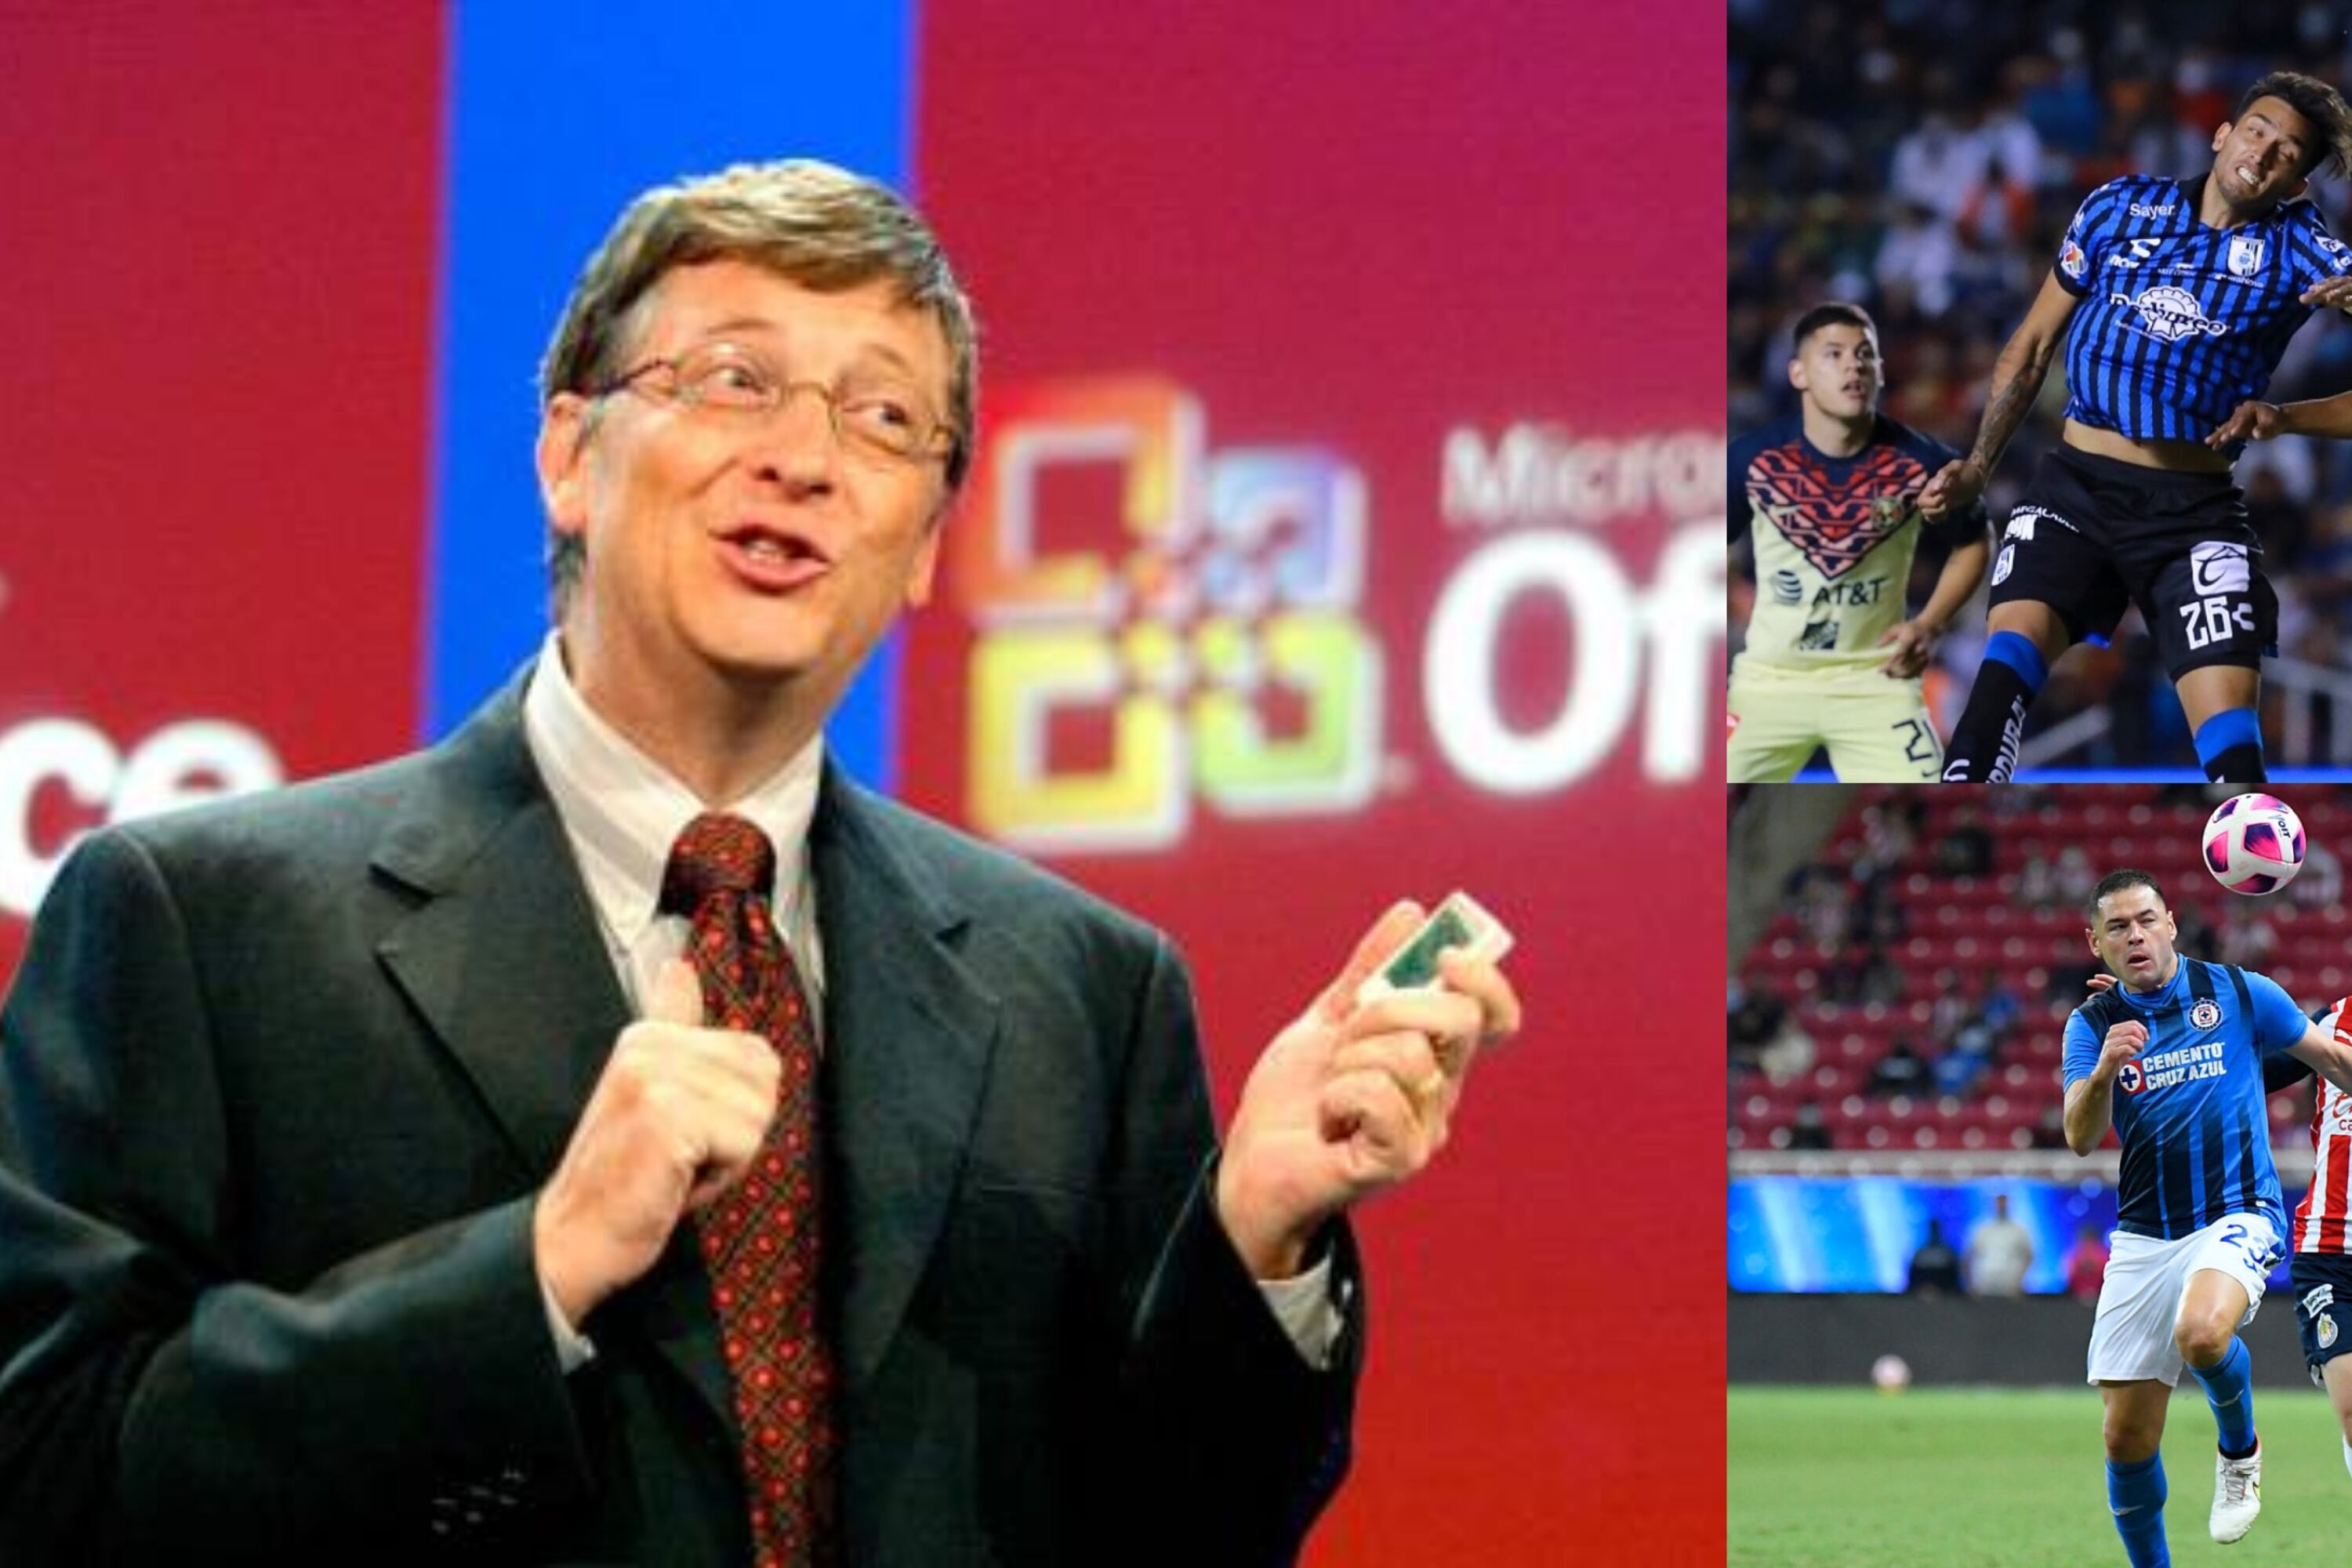 Bill Gates and the Mexican club in which he holds a stake, surprisingly